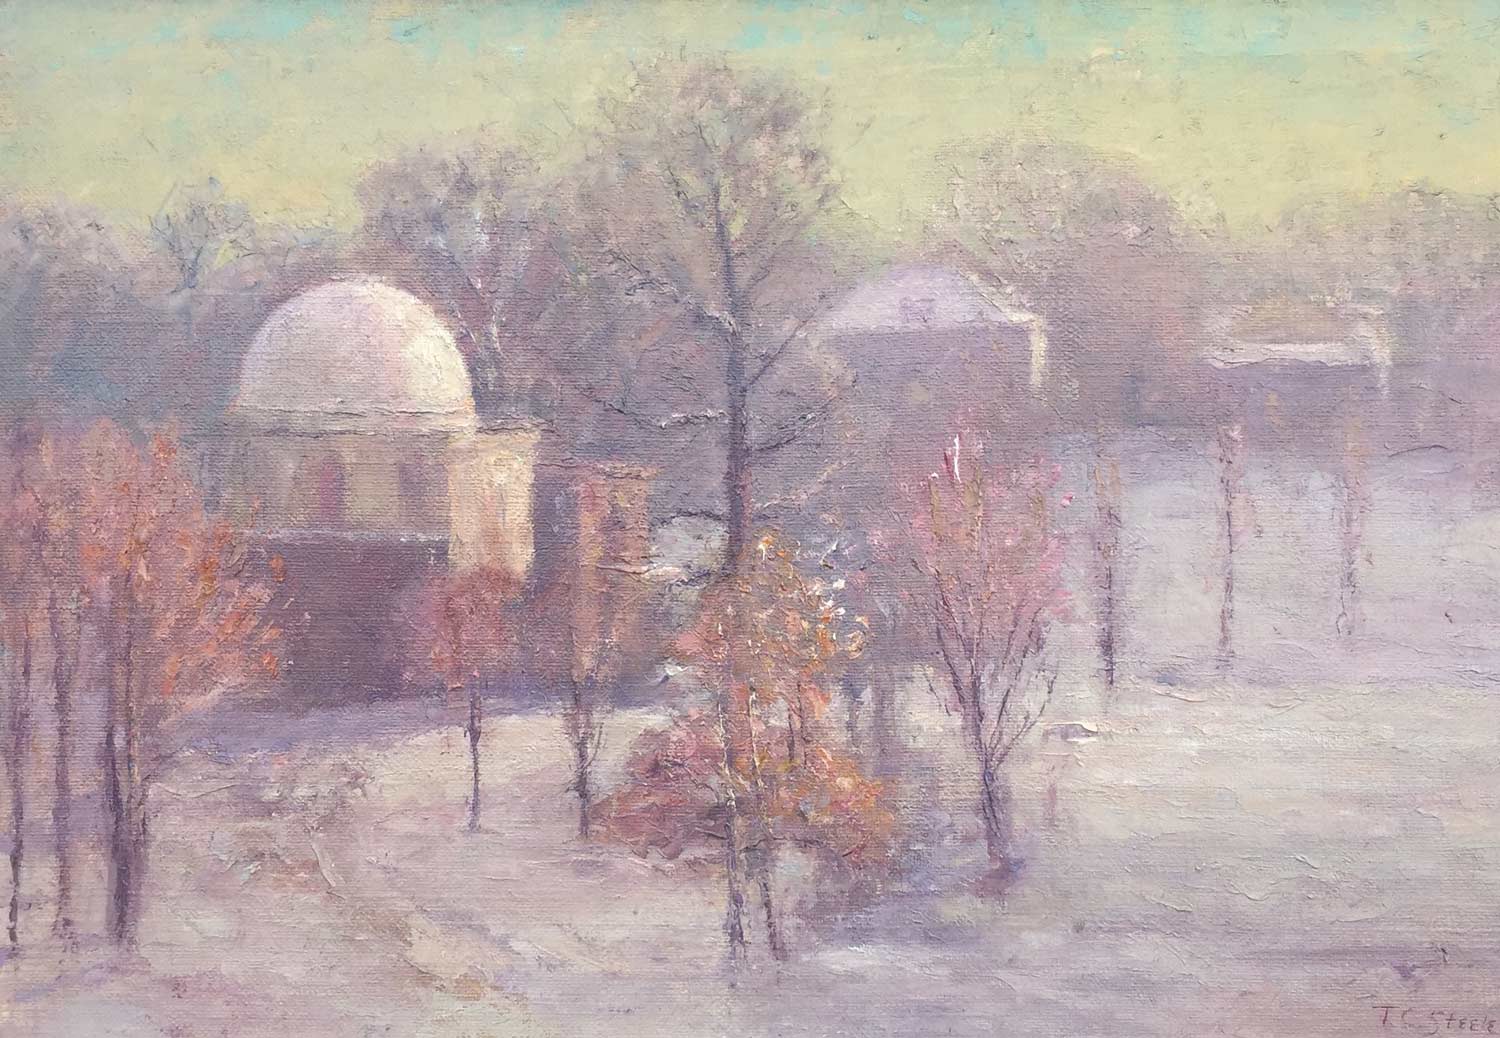 Oil on canvas painting of an observatory at Indiana University in winter, with warm pastel coloring